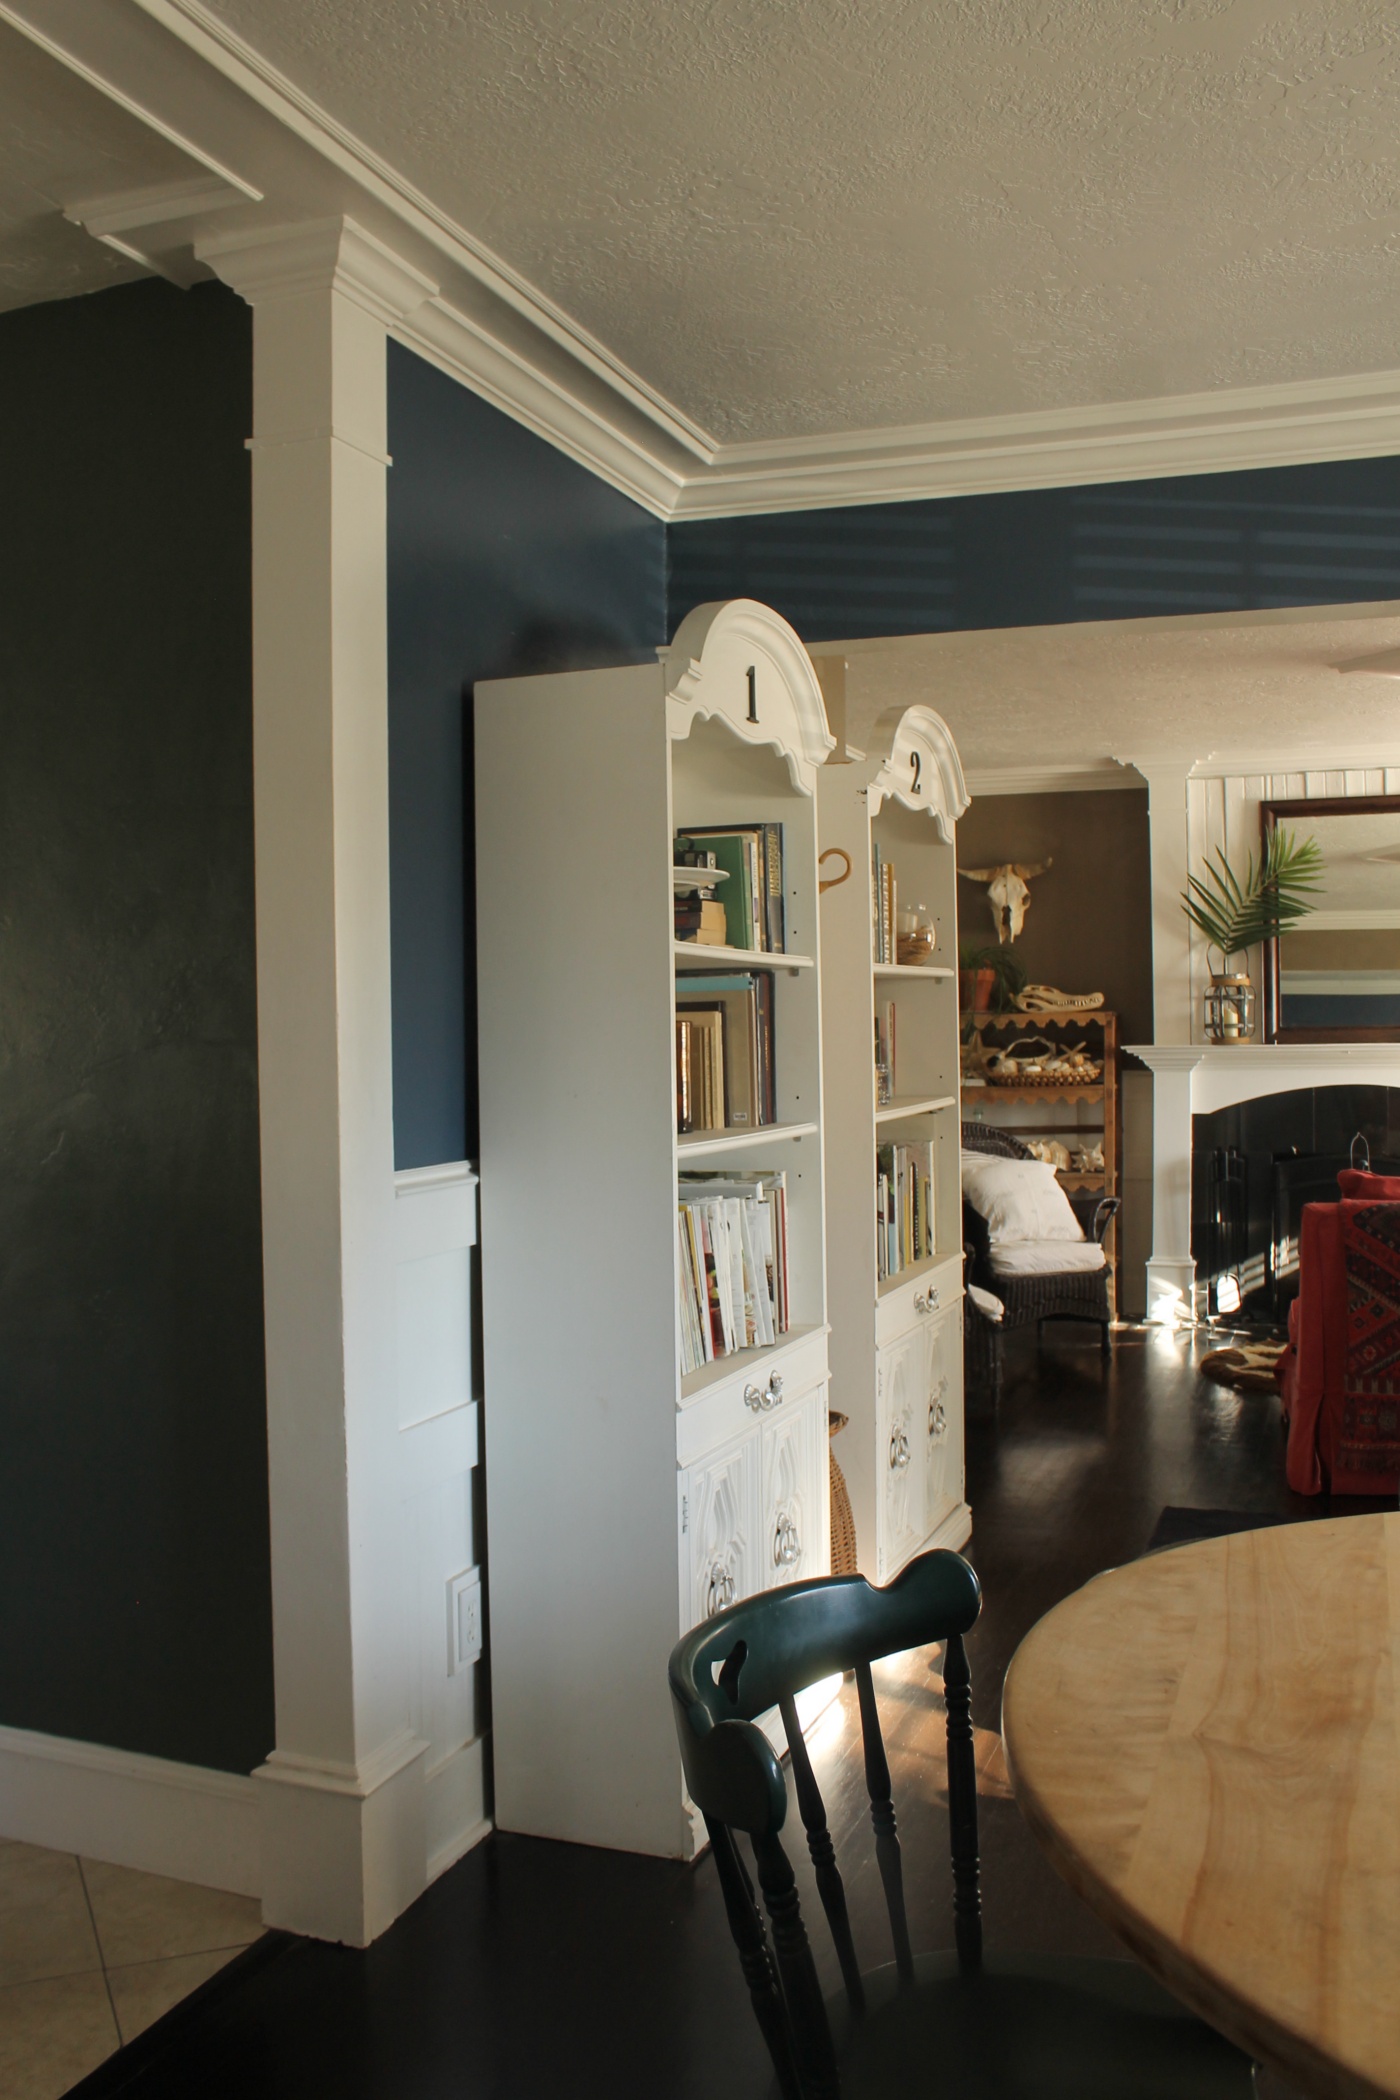 The Paint Color I *Really* Want to Use on the Walls of Our Home